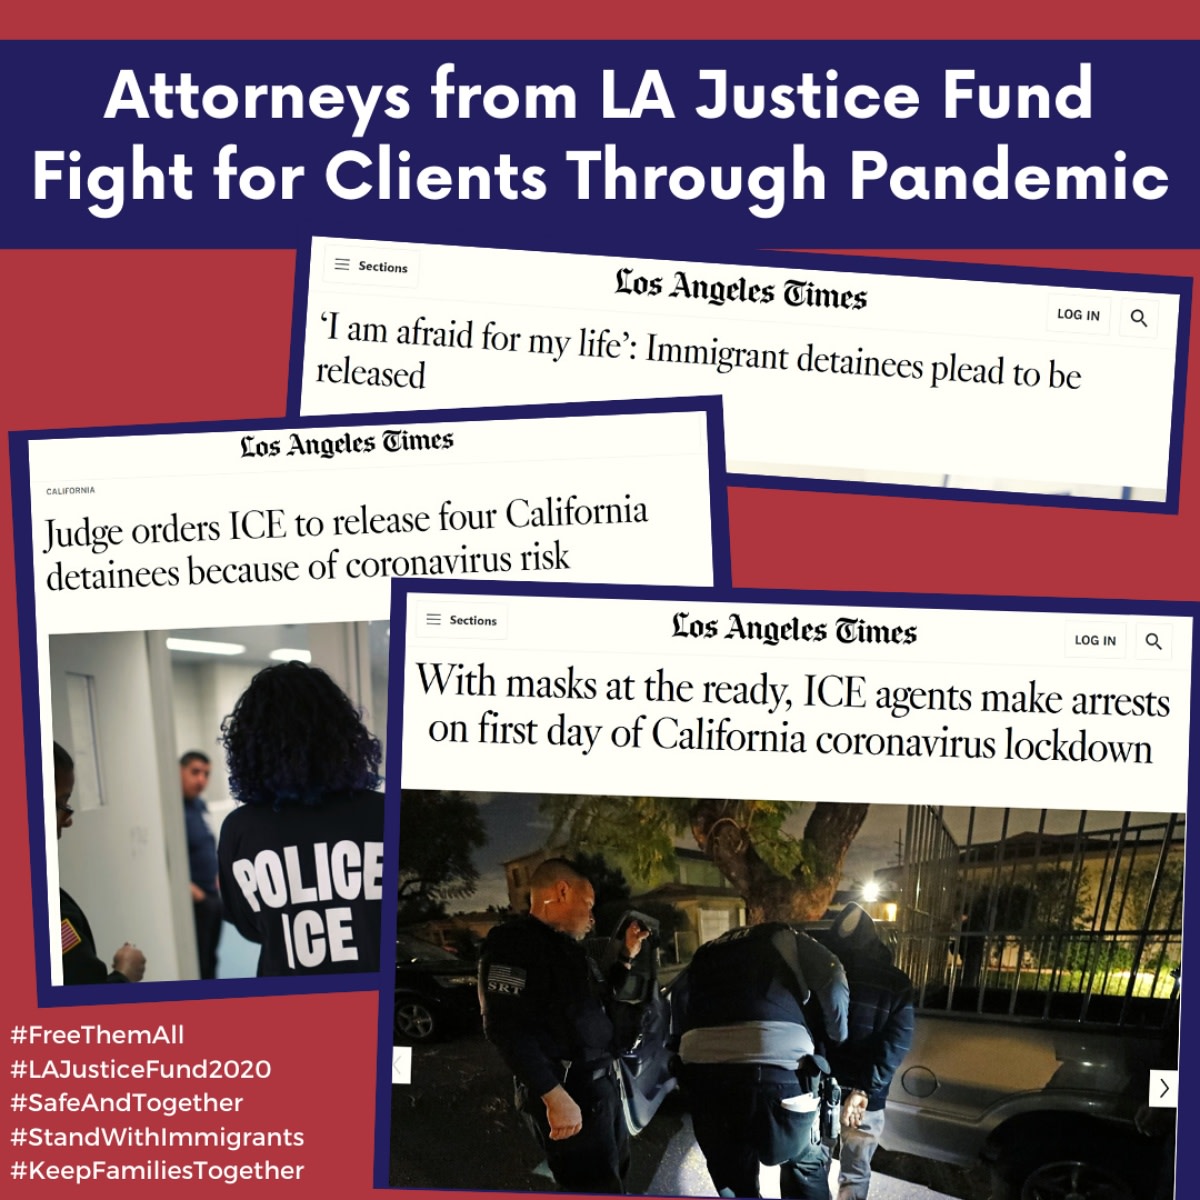 ICE didn’t stop targeting immigrants during the pandemic. LAJF attorneys were there to defend them.